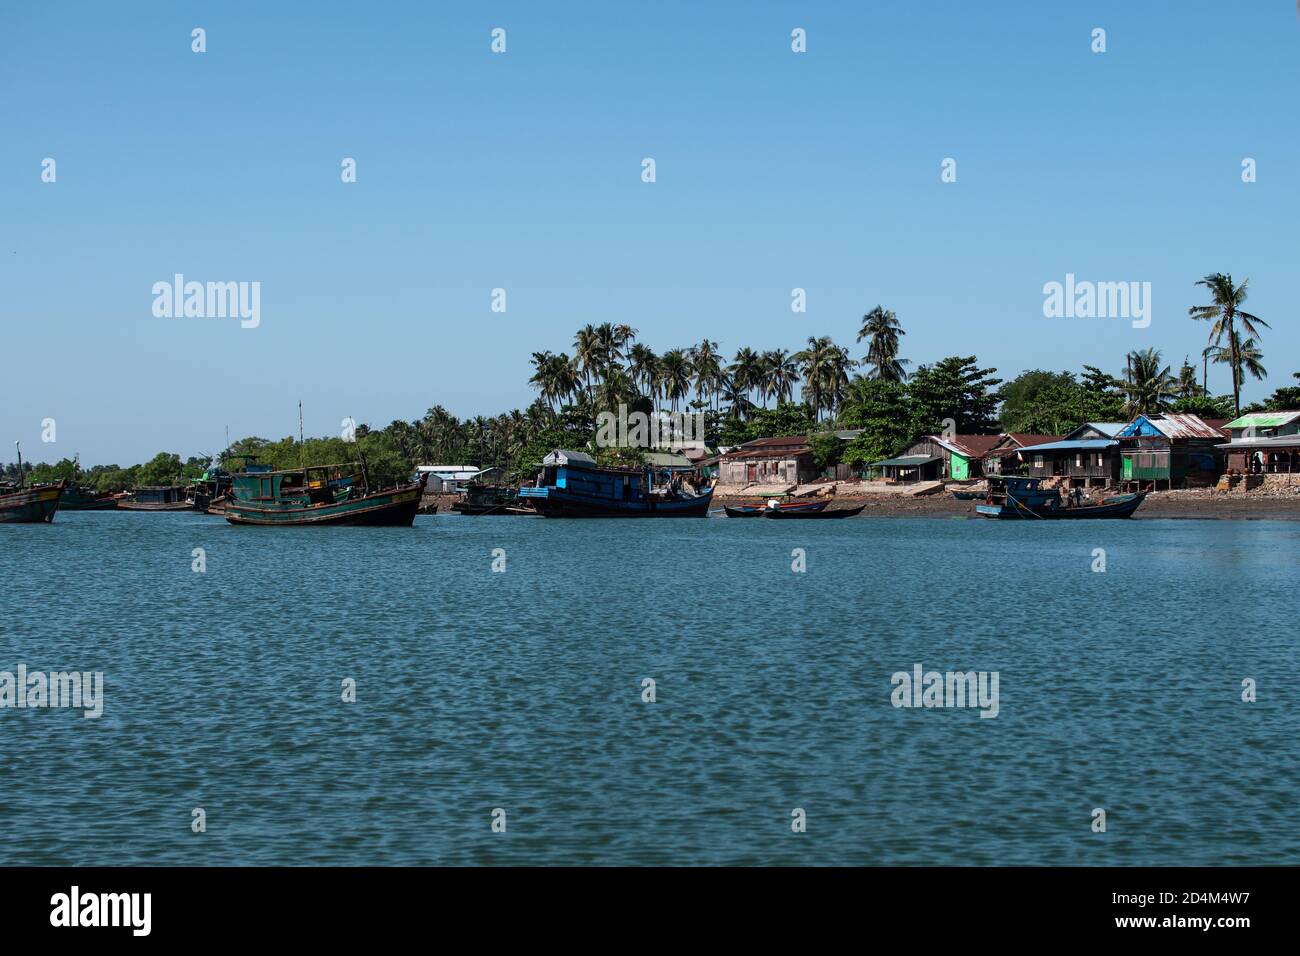 Several traditional wooden boats in a river and houses on the shore by the fishing village Chaung Thar, Irrawaddy, western Myanmar Stock Photo